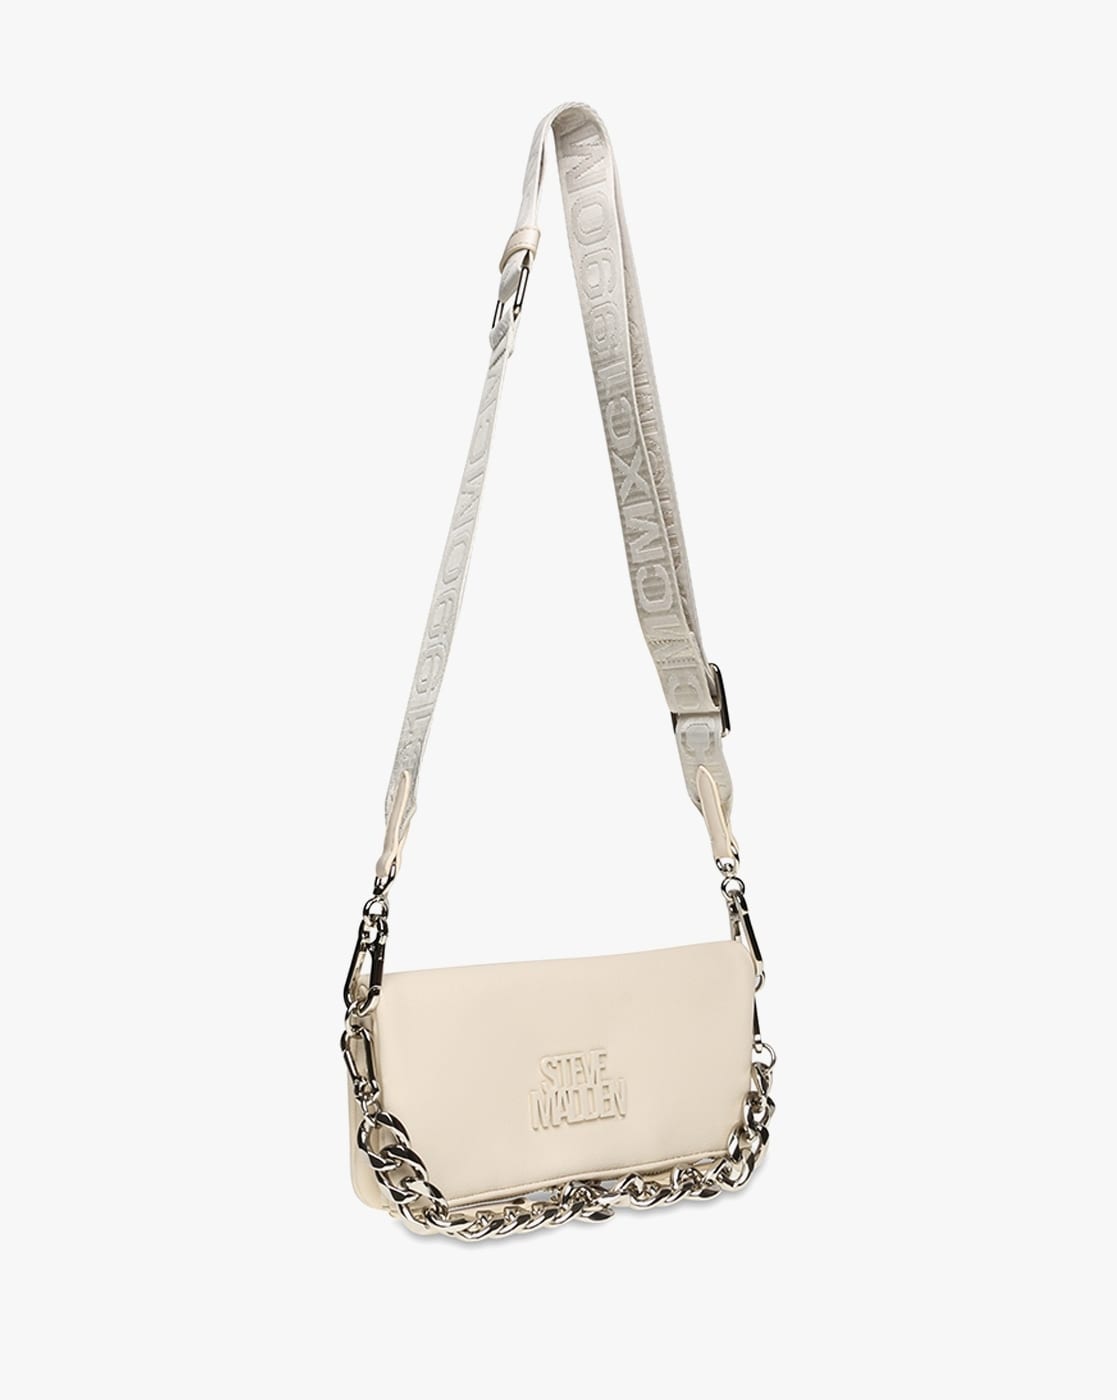 Buy Guess Bags Online in India | Myntra